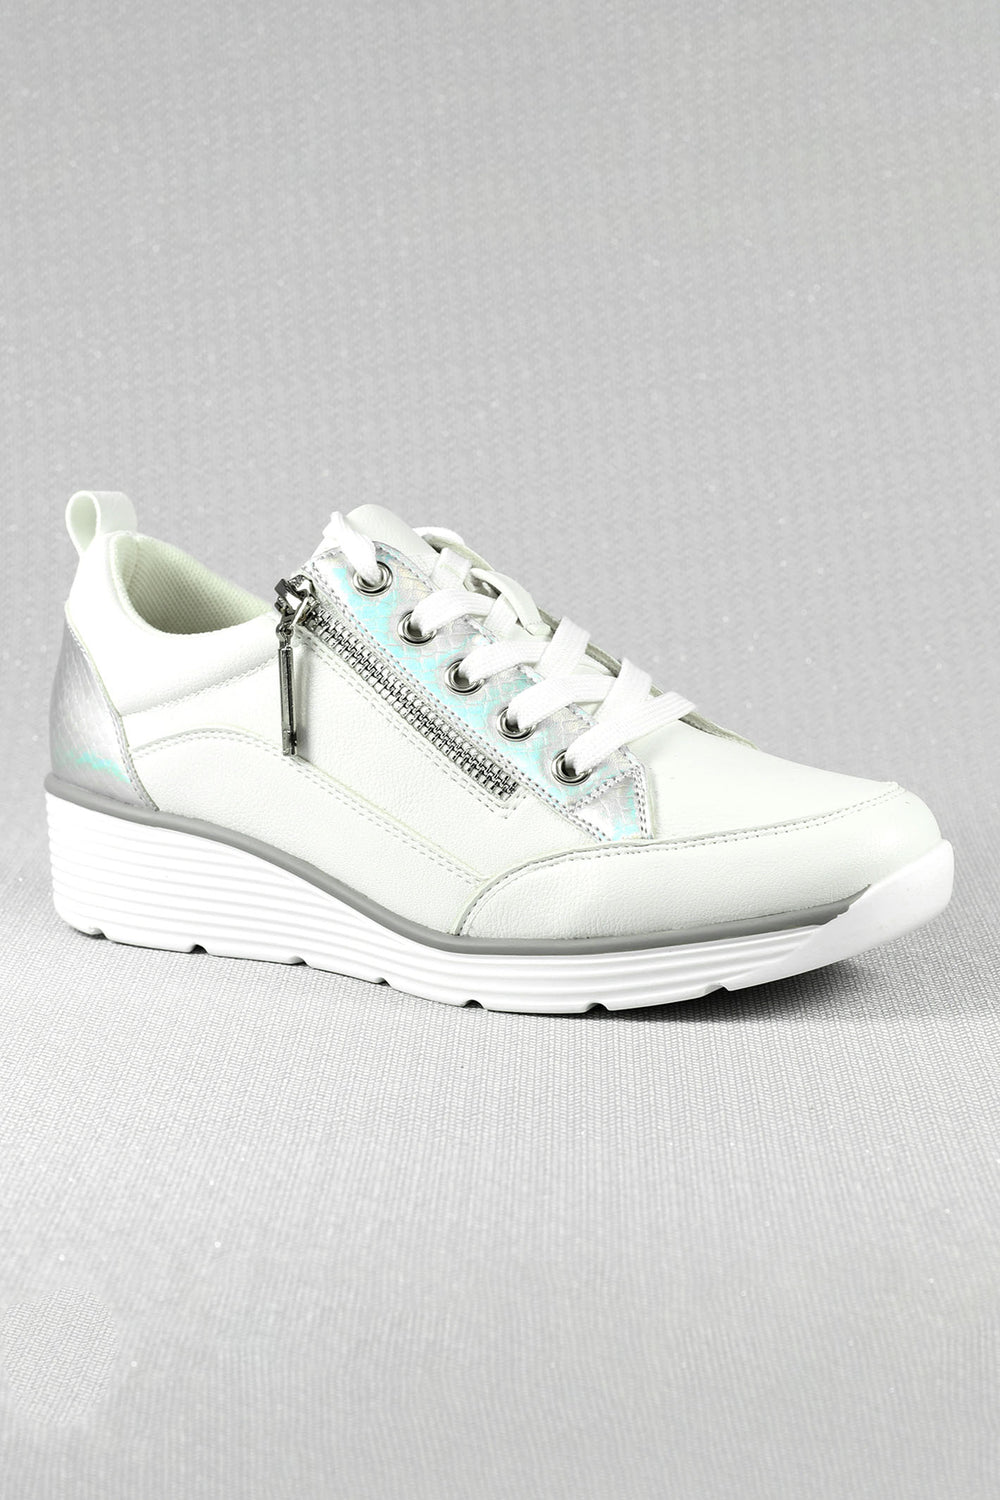 Lunar DLW004 White Kiley Trainers - Experience Boutique